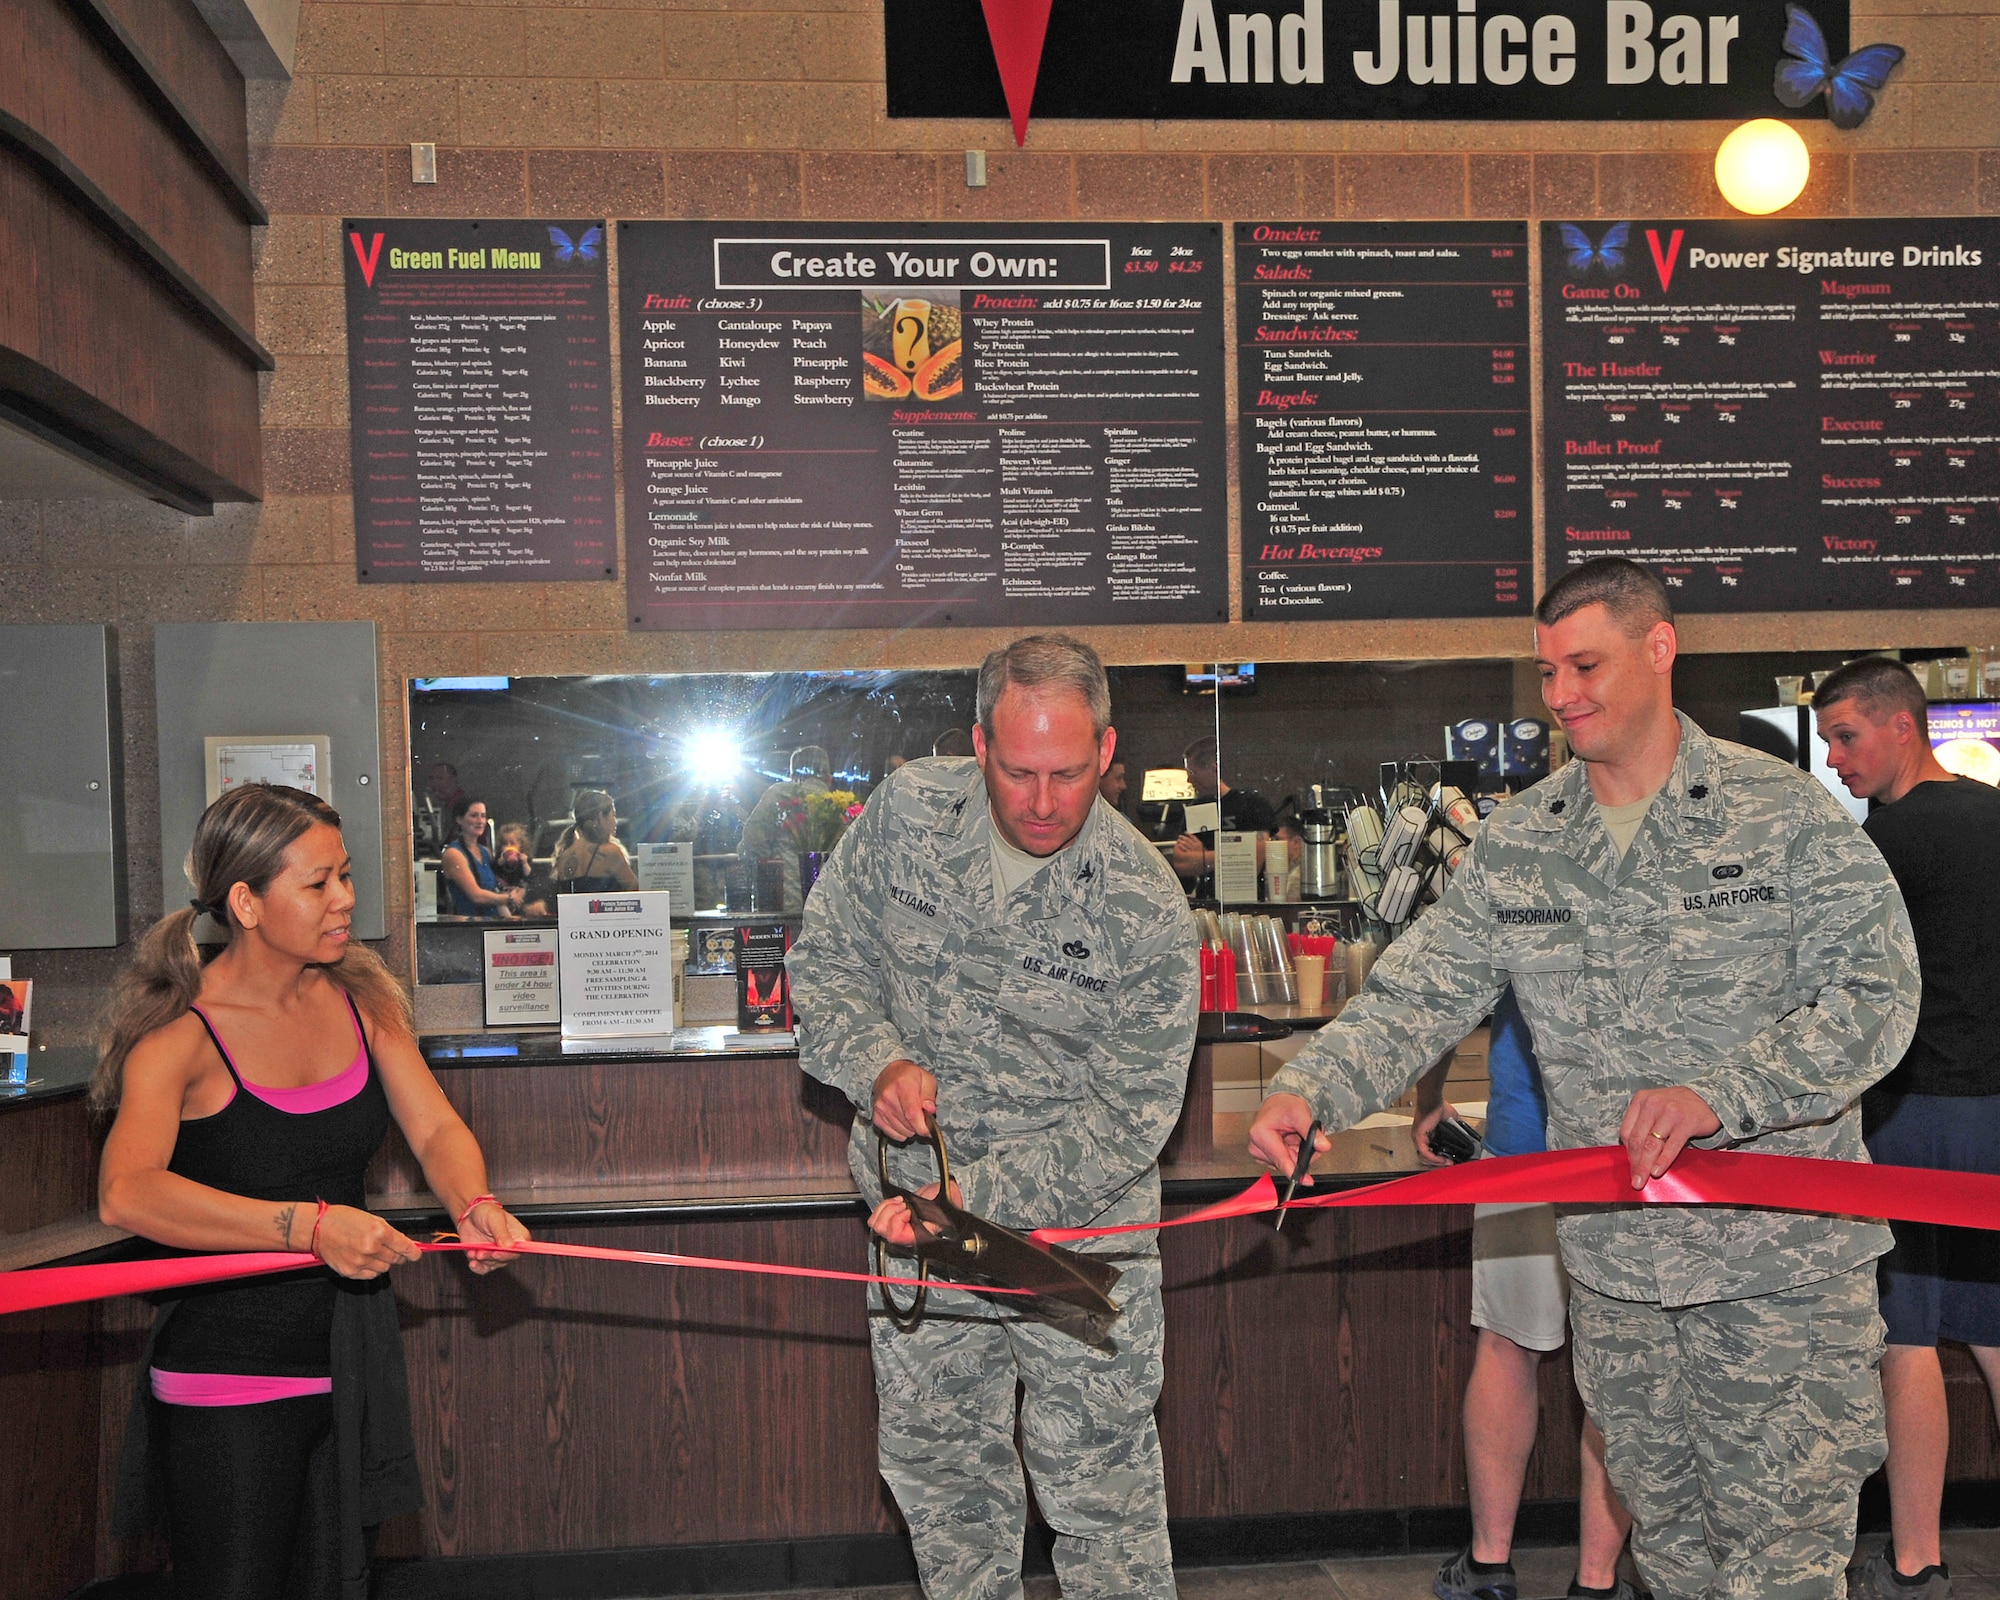 U.S. Air Force Col. Greg Williams, 355th Mission Support Group commander, cuts the ribbon to signify the official opening of the juice bar at the Benko Fitness Center on Davis-Monthan Air Force Base, March 3, 2014. The juice bar is hoping to provide a healthy lifestyle to Airmen while they work to stay fit. (U.S. Photo by Senior Airman Josh Slavin/Released)